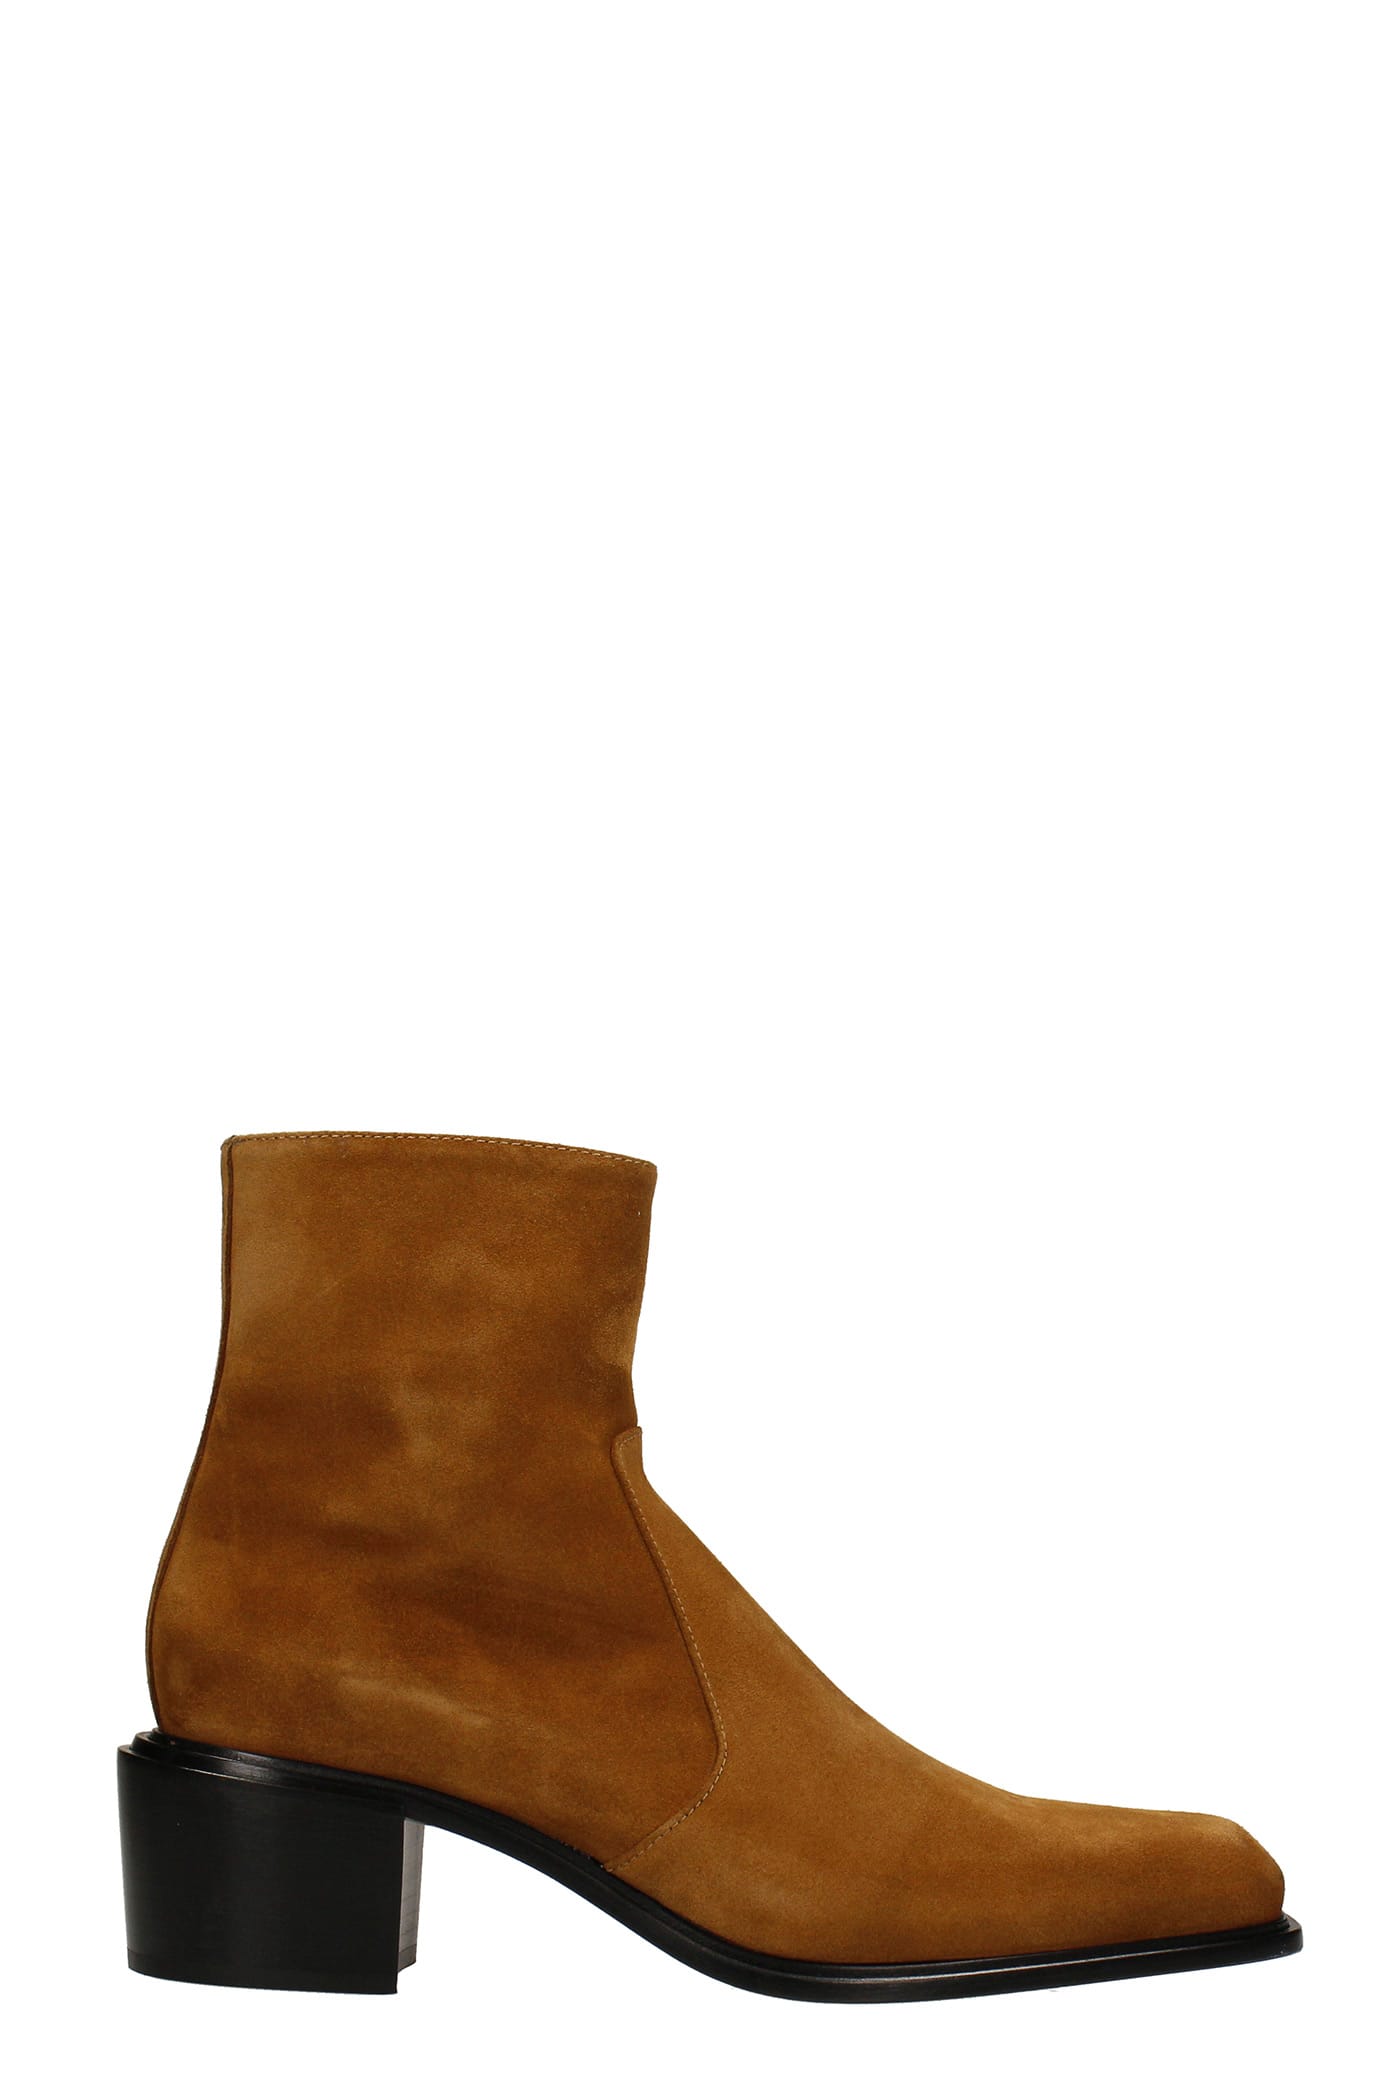 Cesare Paciotti Ankle Boots In Leather Color Suede